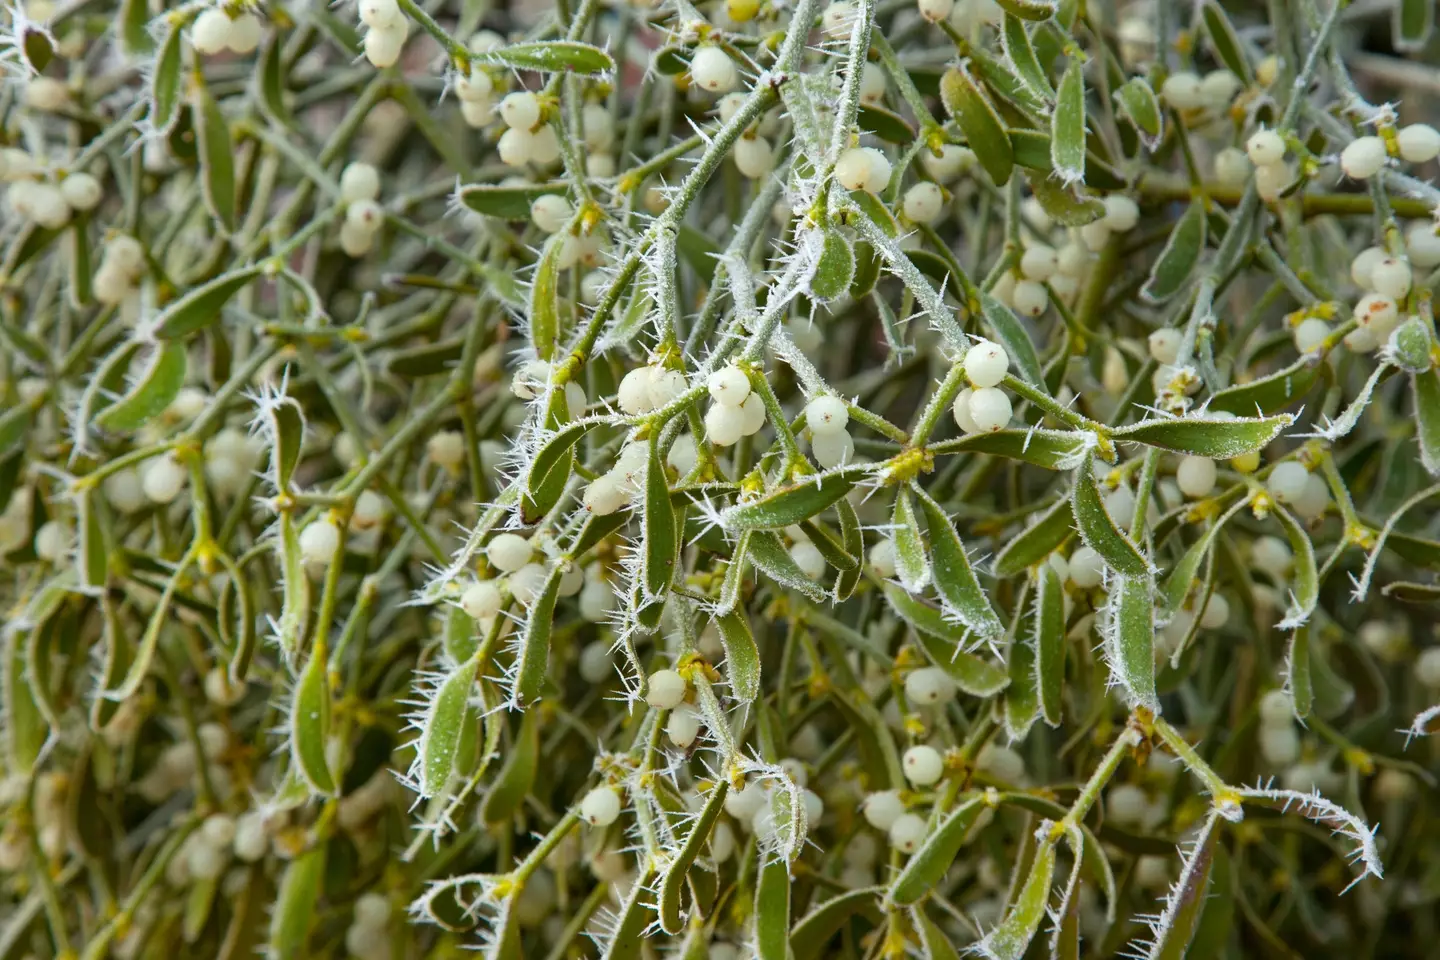 Mistletoe is an evergreen plant with white berries.